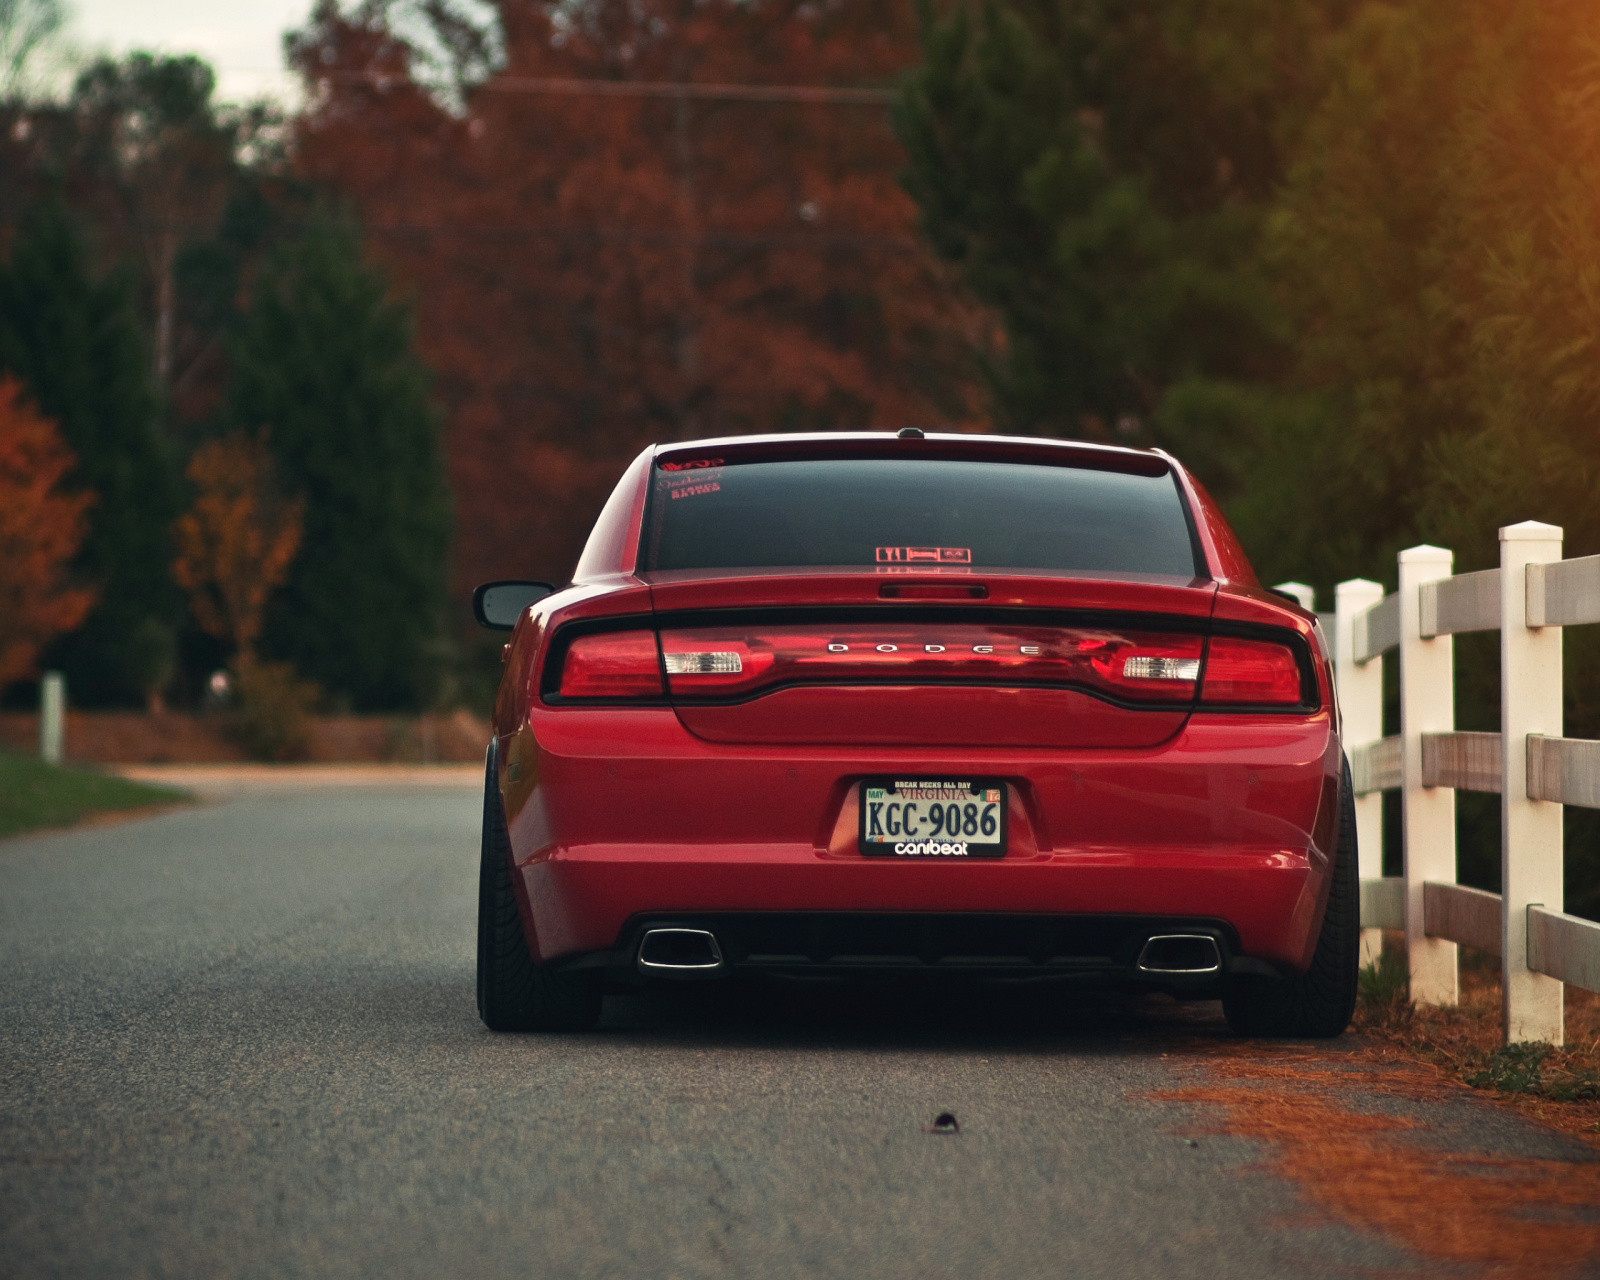 Dodge Charger RT 5 7L wallpaper 1600x1280